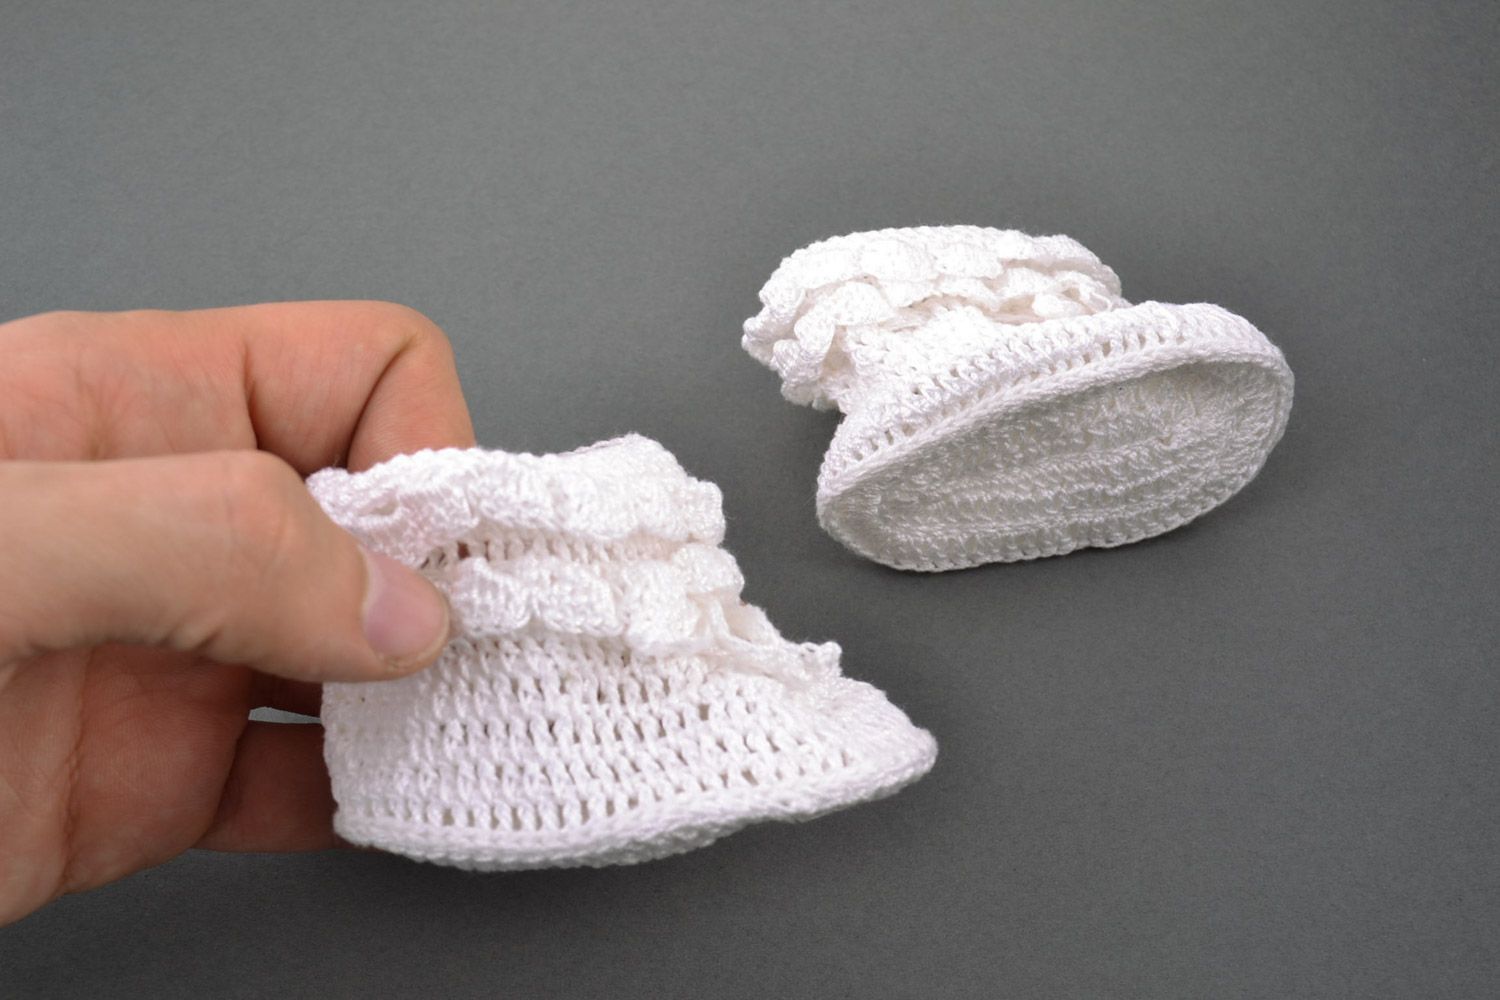 White handmade baby booties knitted of wool and cotton in the shape of shoes photo 3